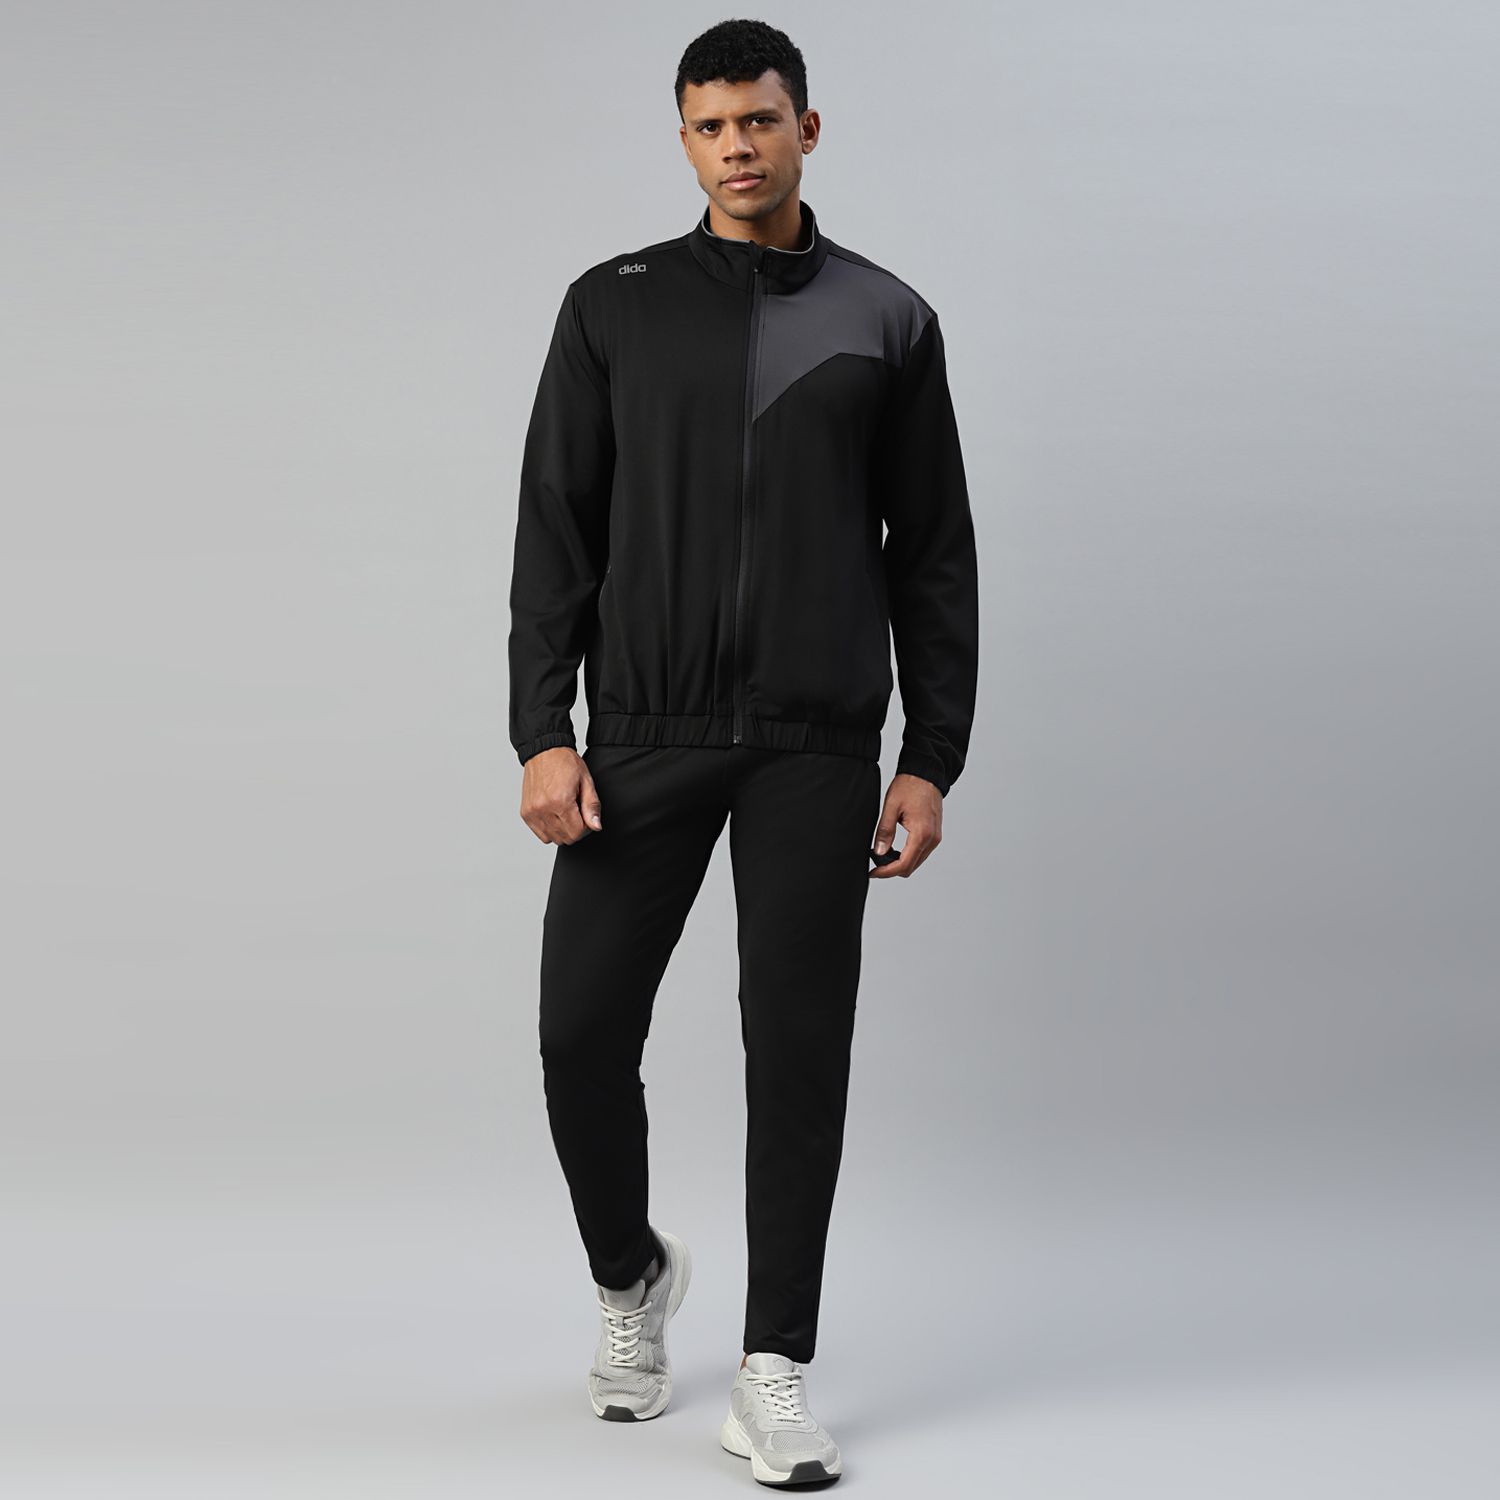     			Dida Sportswear Black Polyester Regular Fit Colorblock Men's Sports Tracksuit ( Pack of 1 )